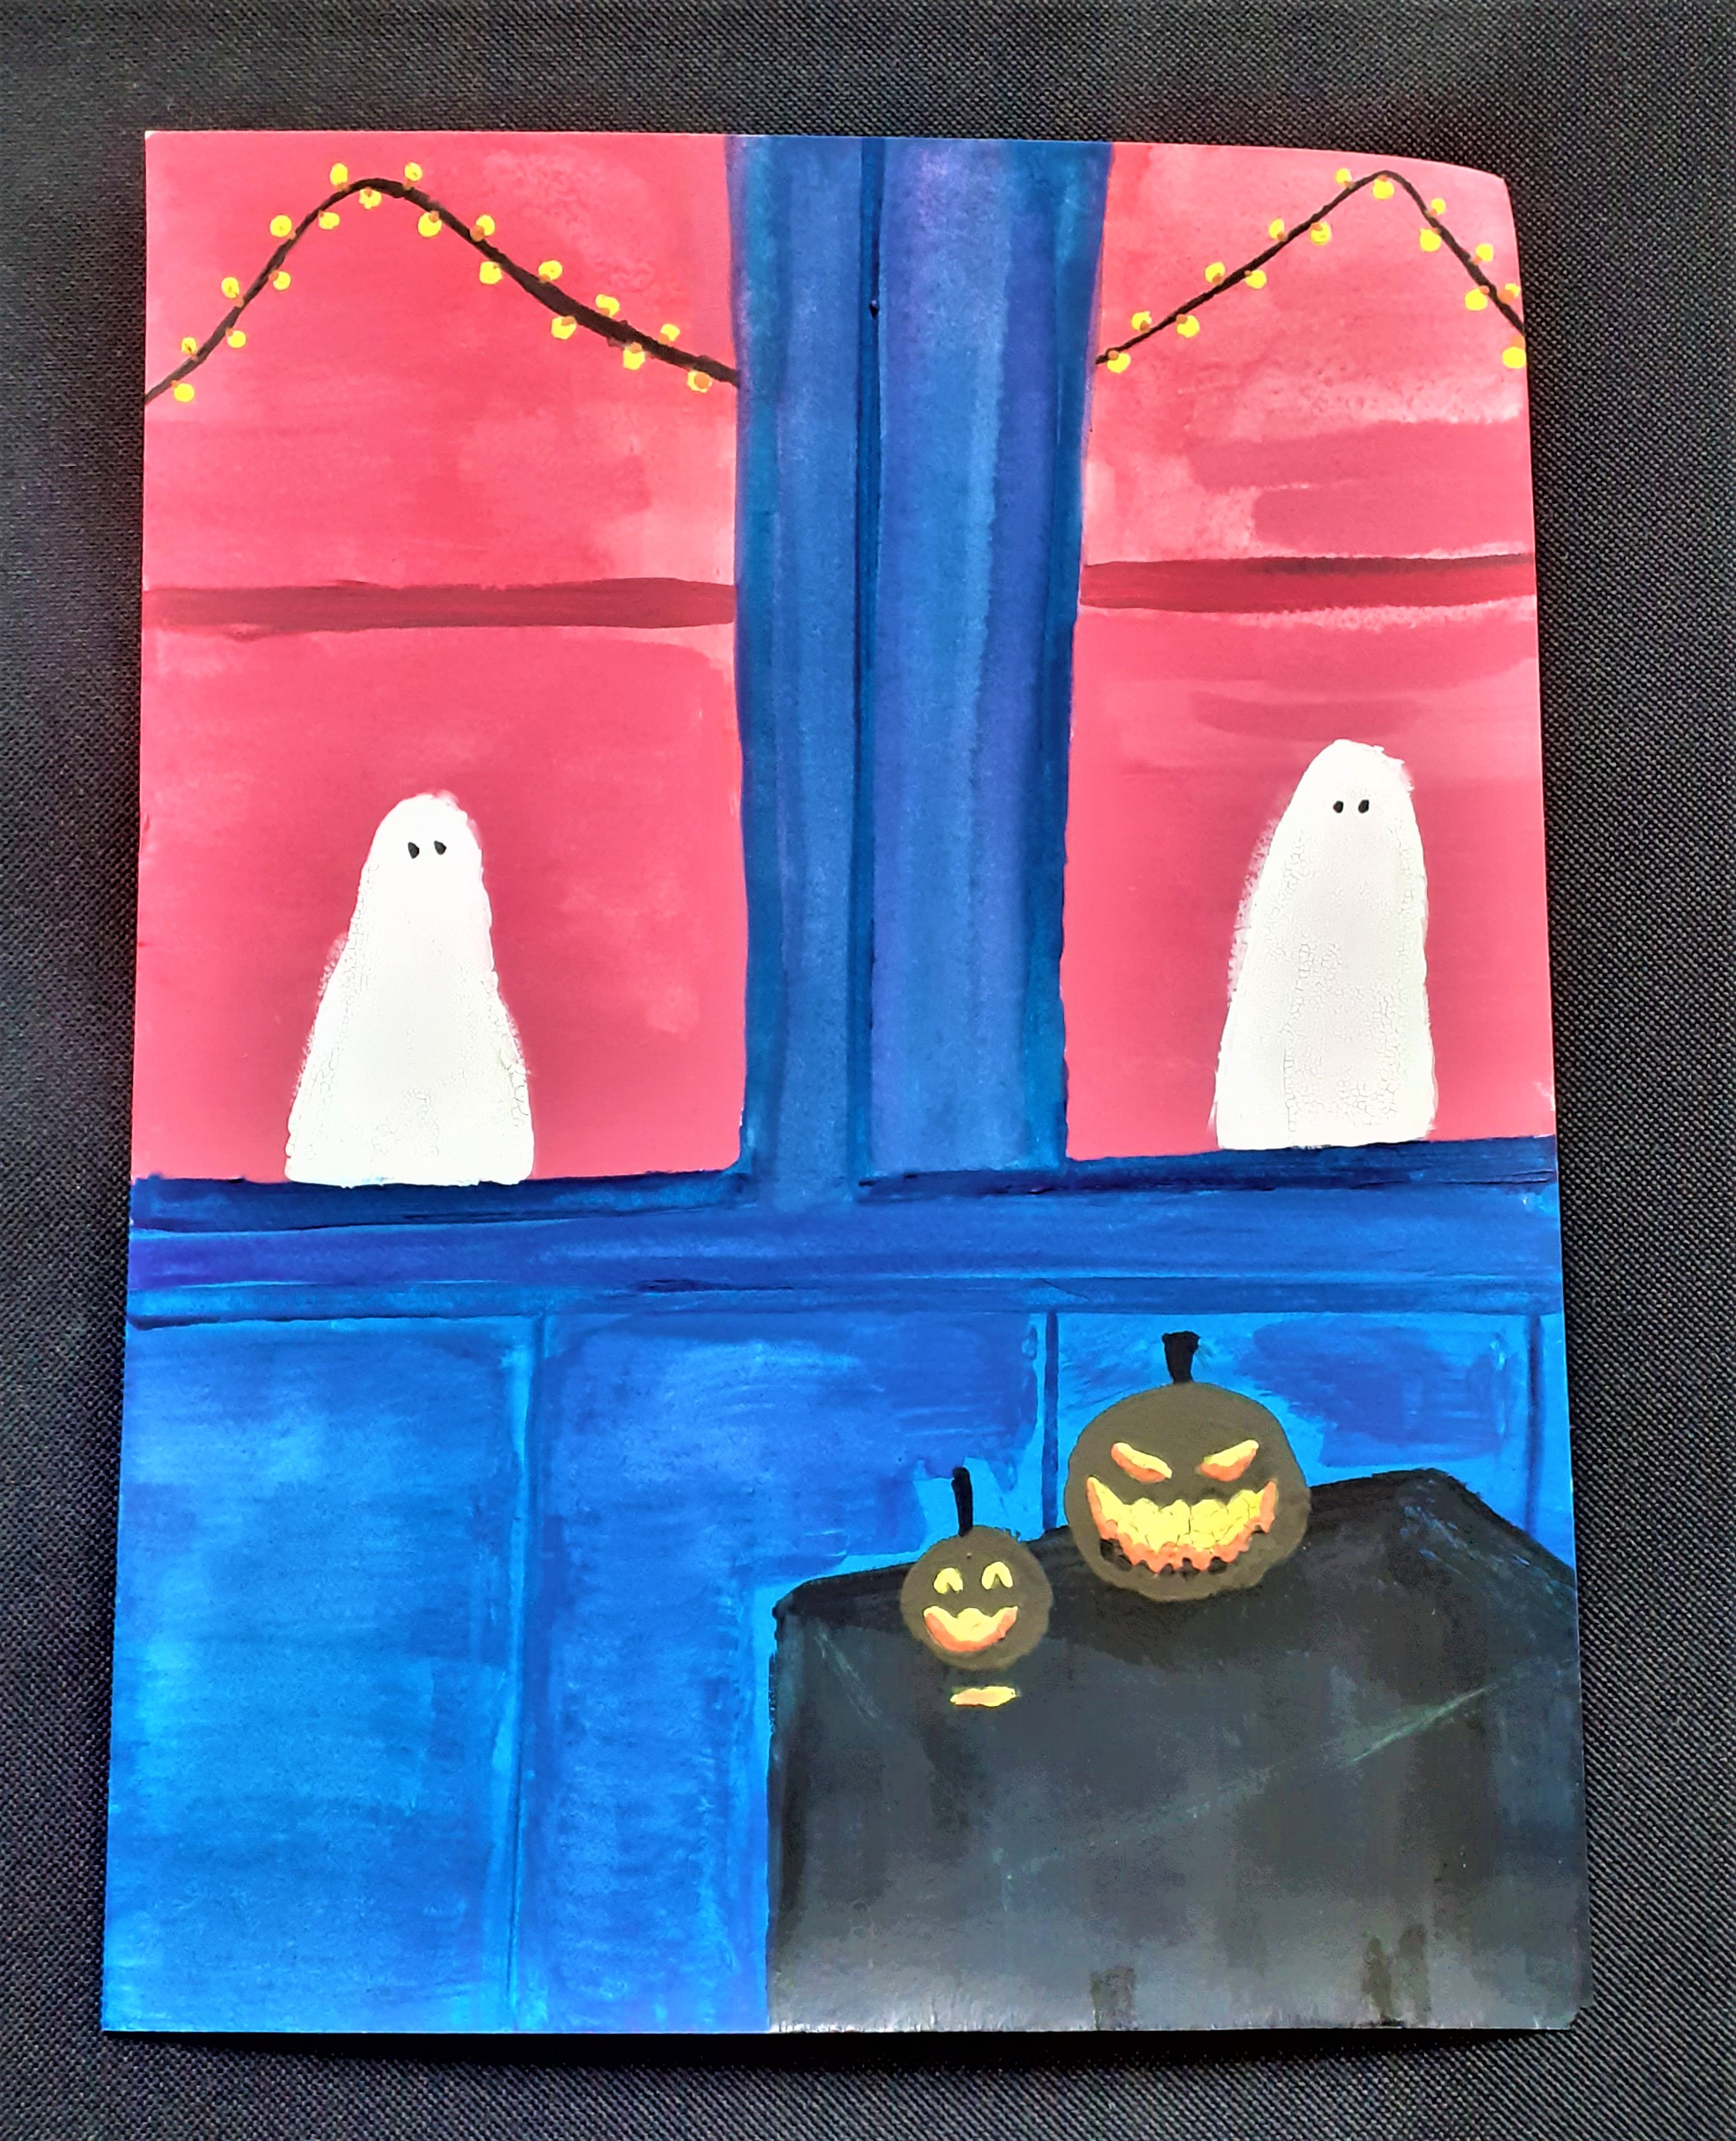 Ghosts in the window